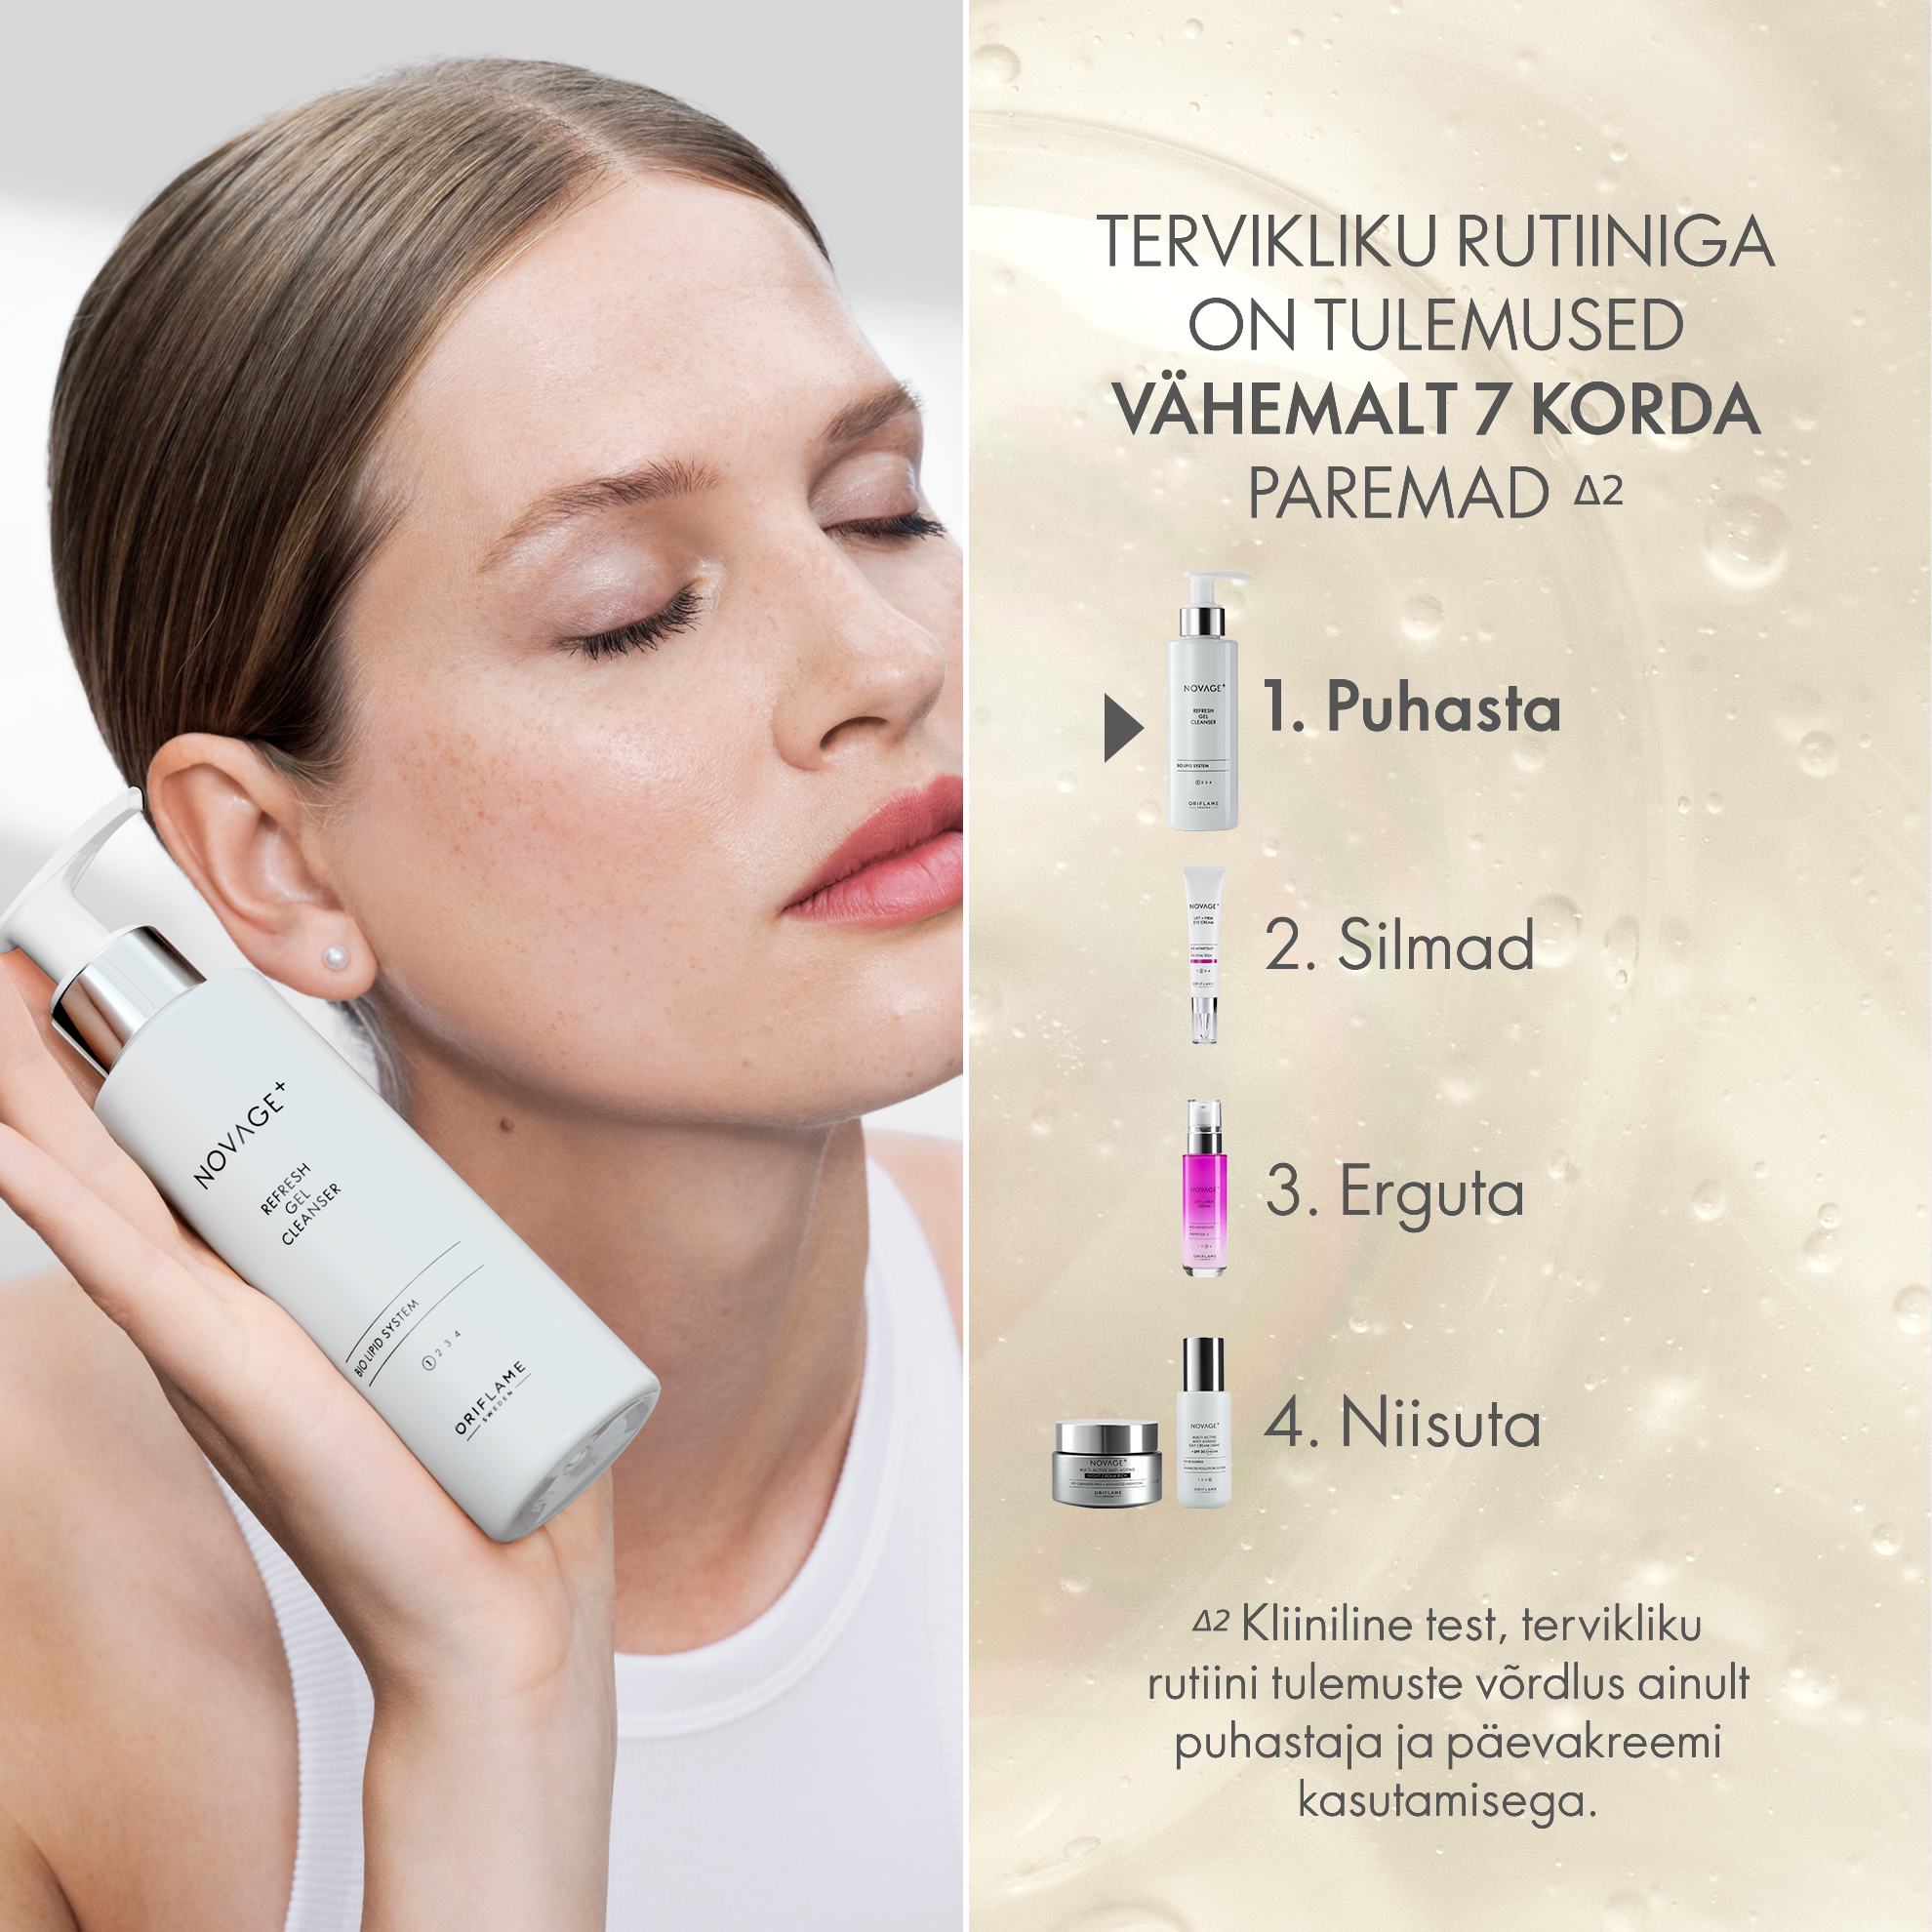 https://media-cdn.oriflame.com/productImage?externalMediaId=product-management-media%2fProducts%2f41029%2fEE%2f41029_5.png&id=17585256&version=1